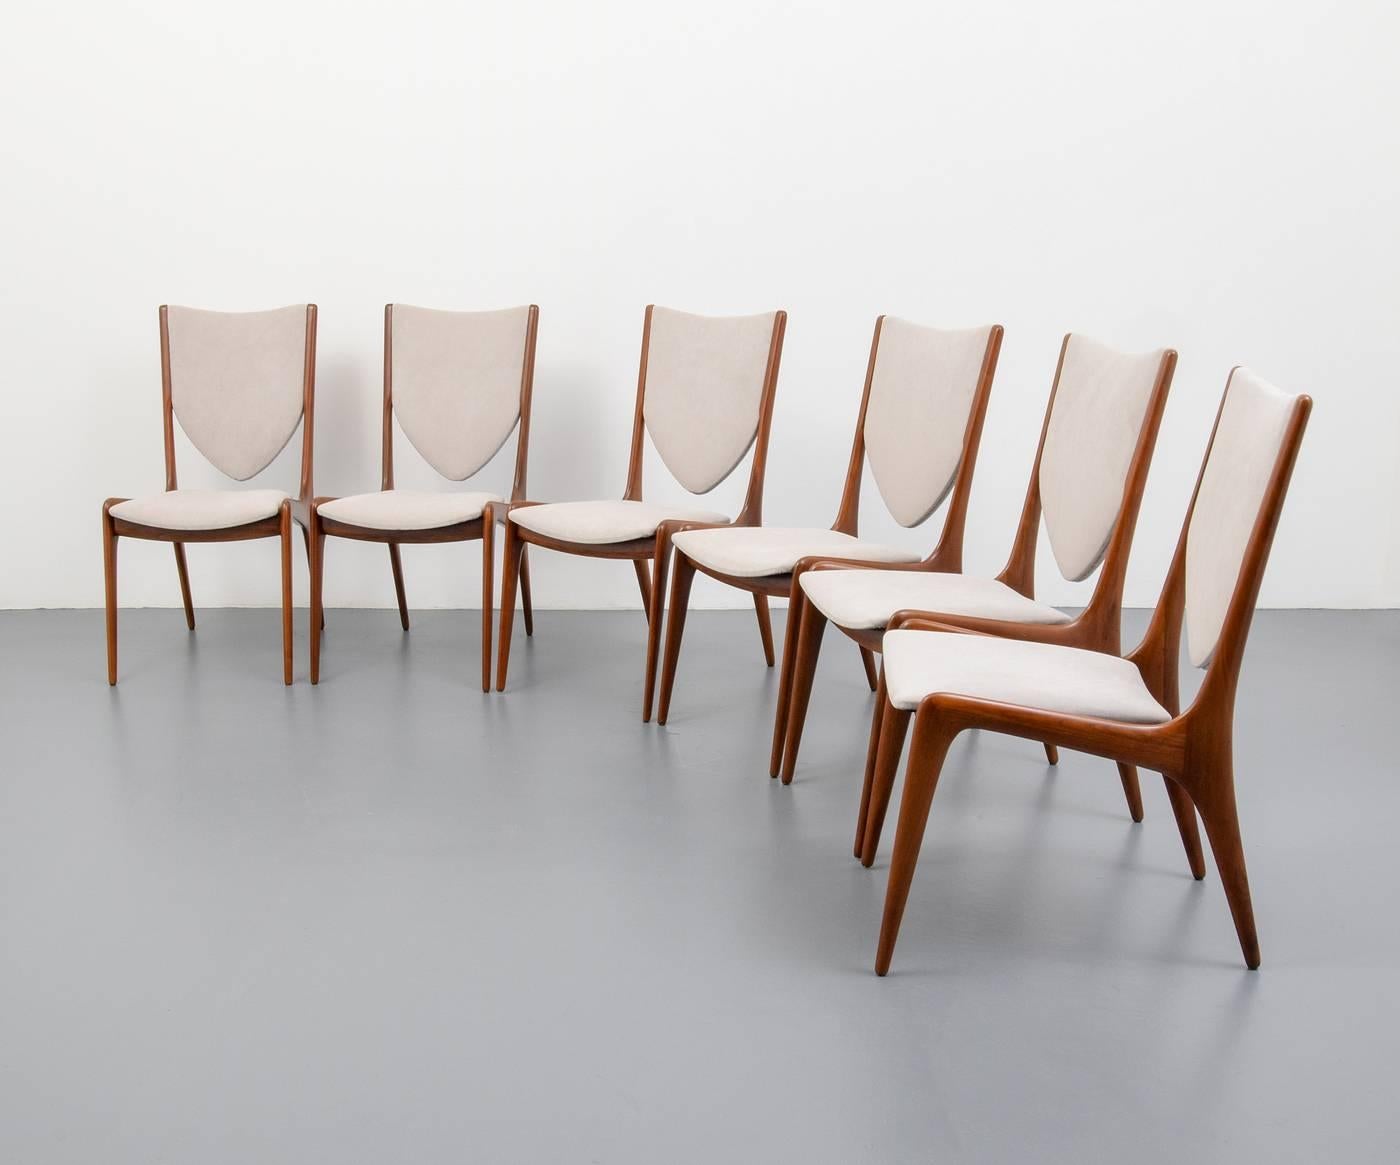 Chairs are model VK103. Set is comprised of two arm chairs and six side chairs. Reference: The Complete Kagan, Vladimir Kagan, pg. 265. Provenance: Rago Arts, 10.27.2013, Lot 1324. Kagan-Dreyfuss, Inc. brand to one or more chairs.

Dimensions(H,